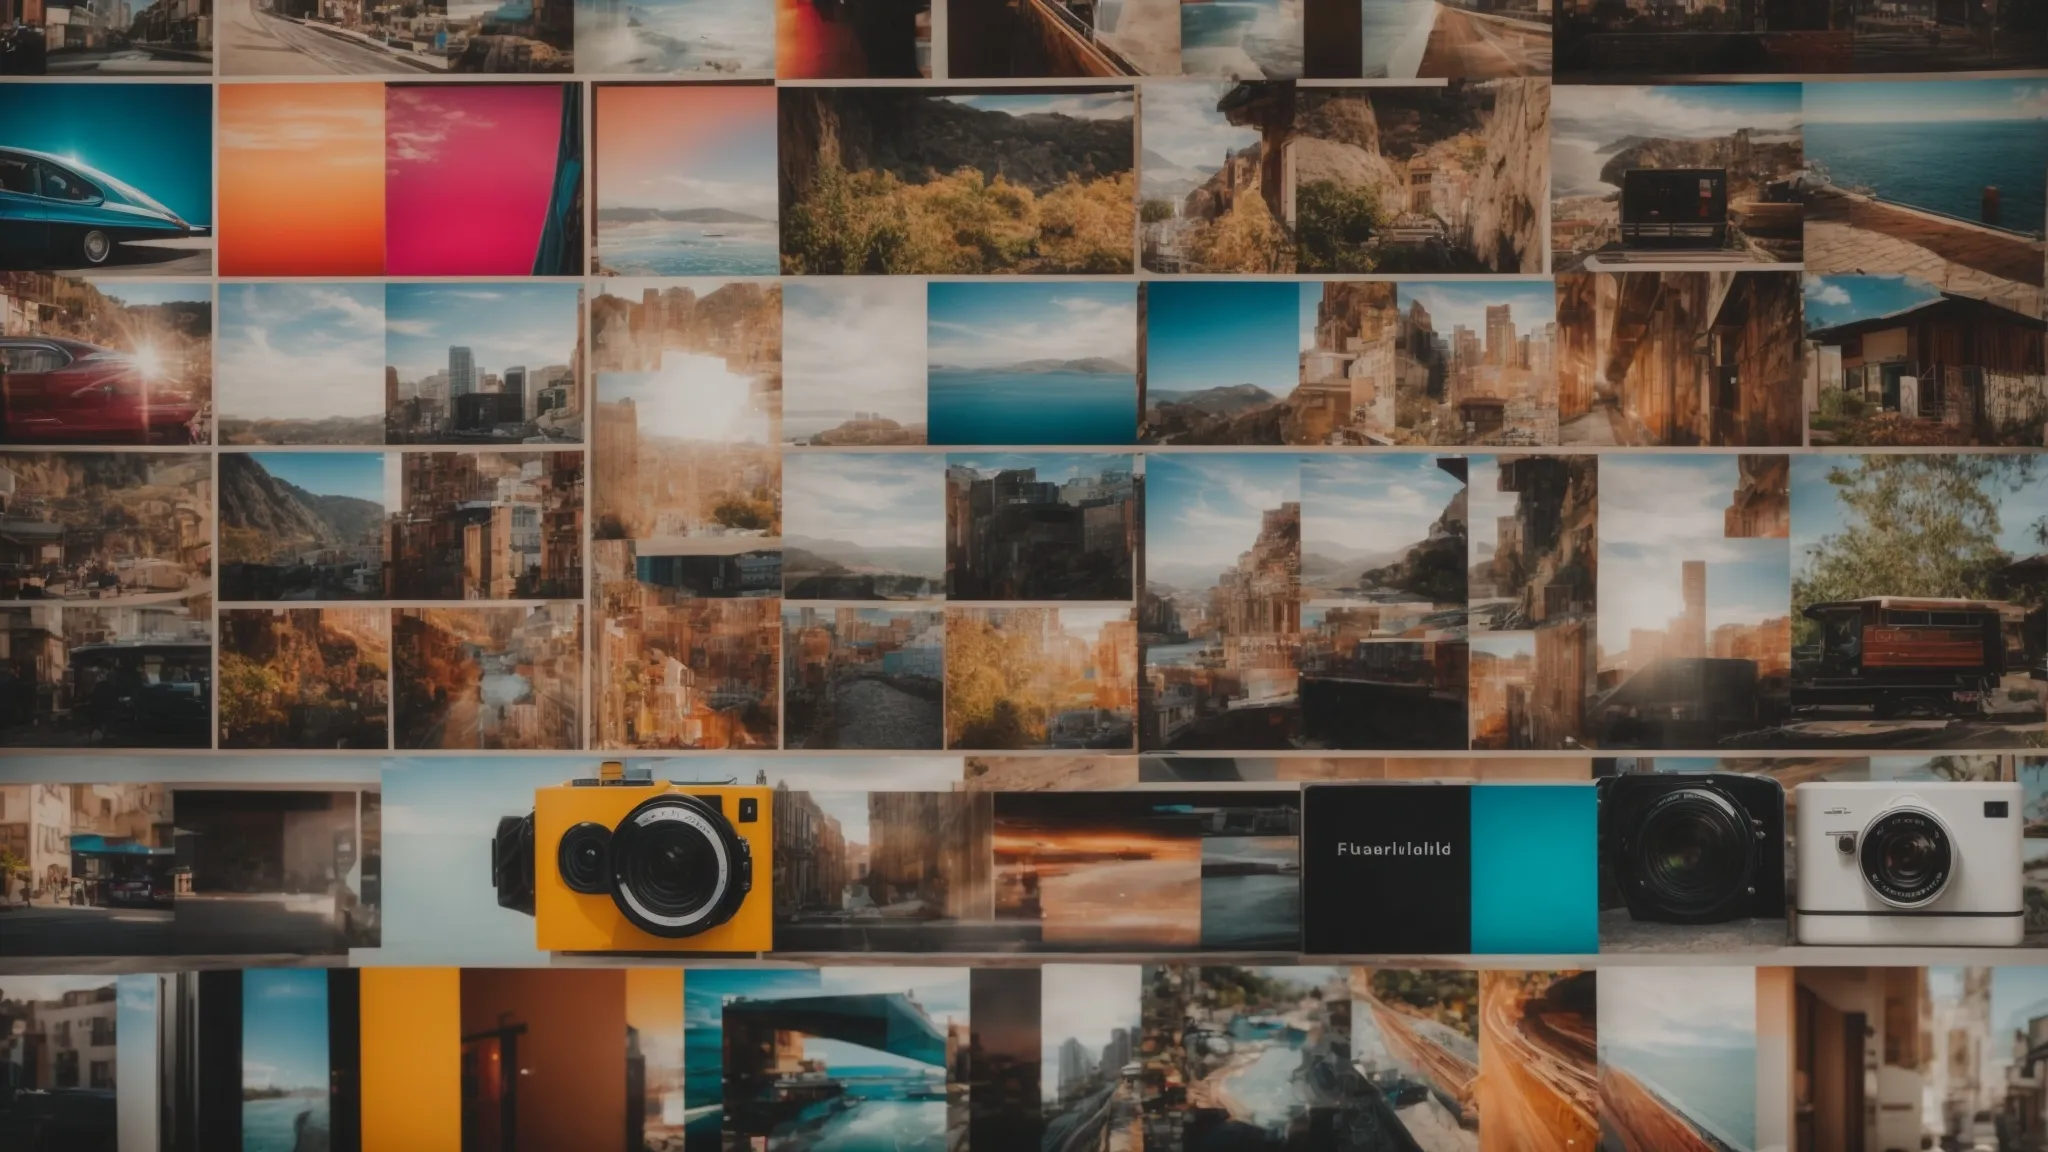 a colorful, eye-catching video thumbnail display featuring a diverse array of intriguing images.